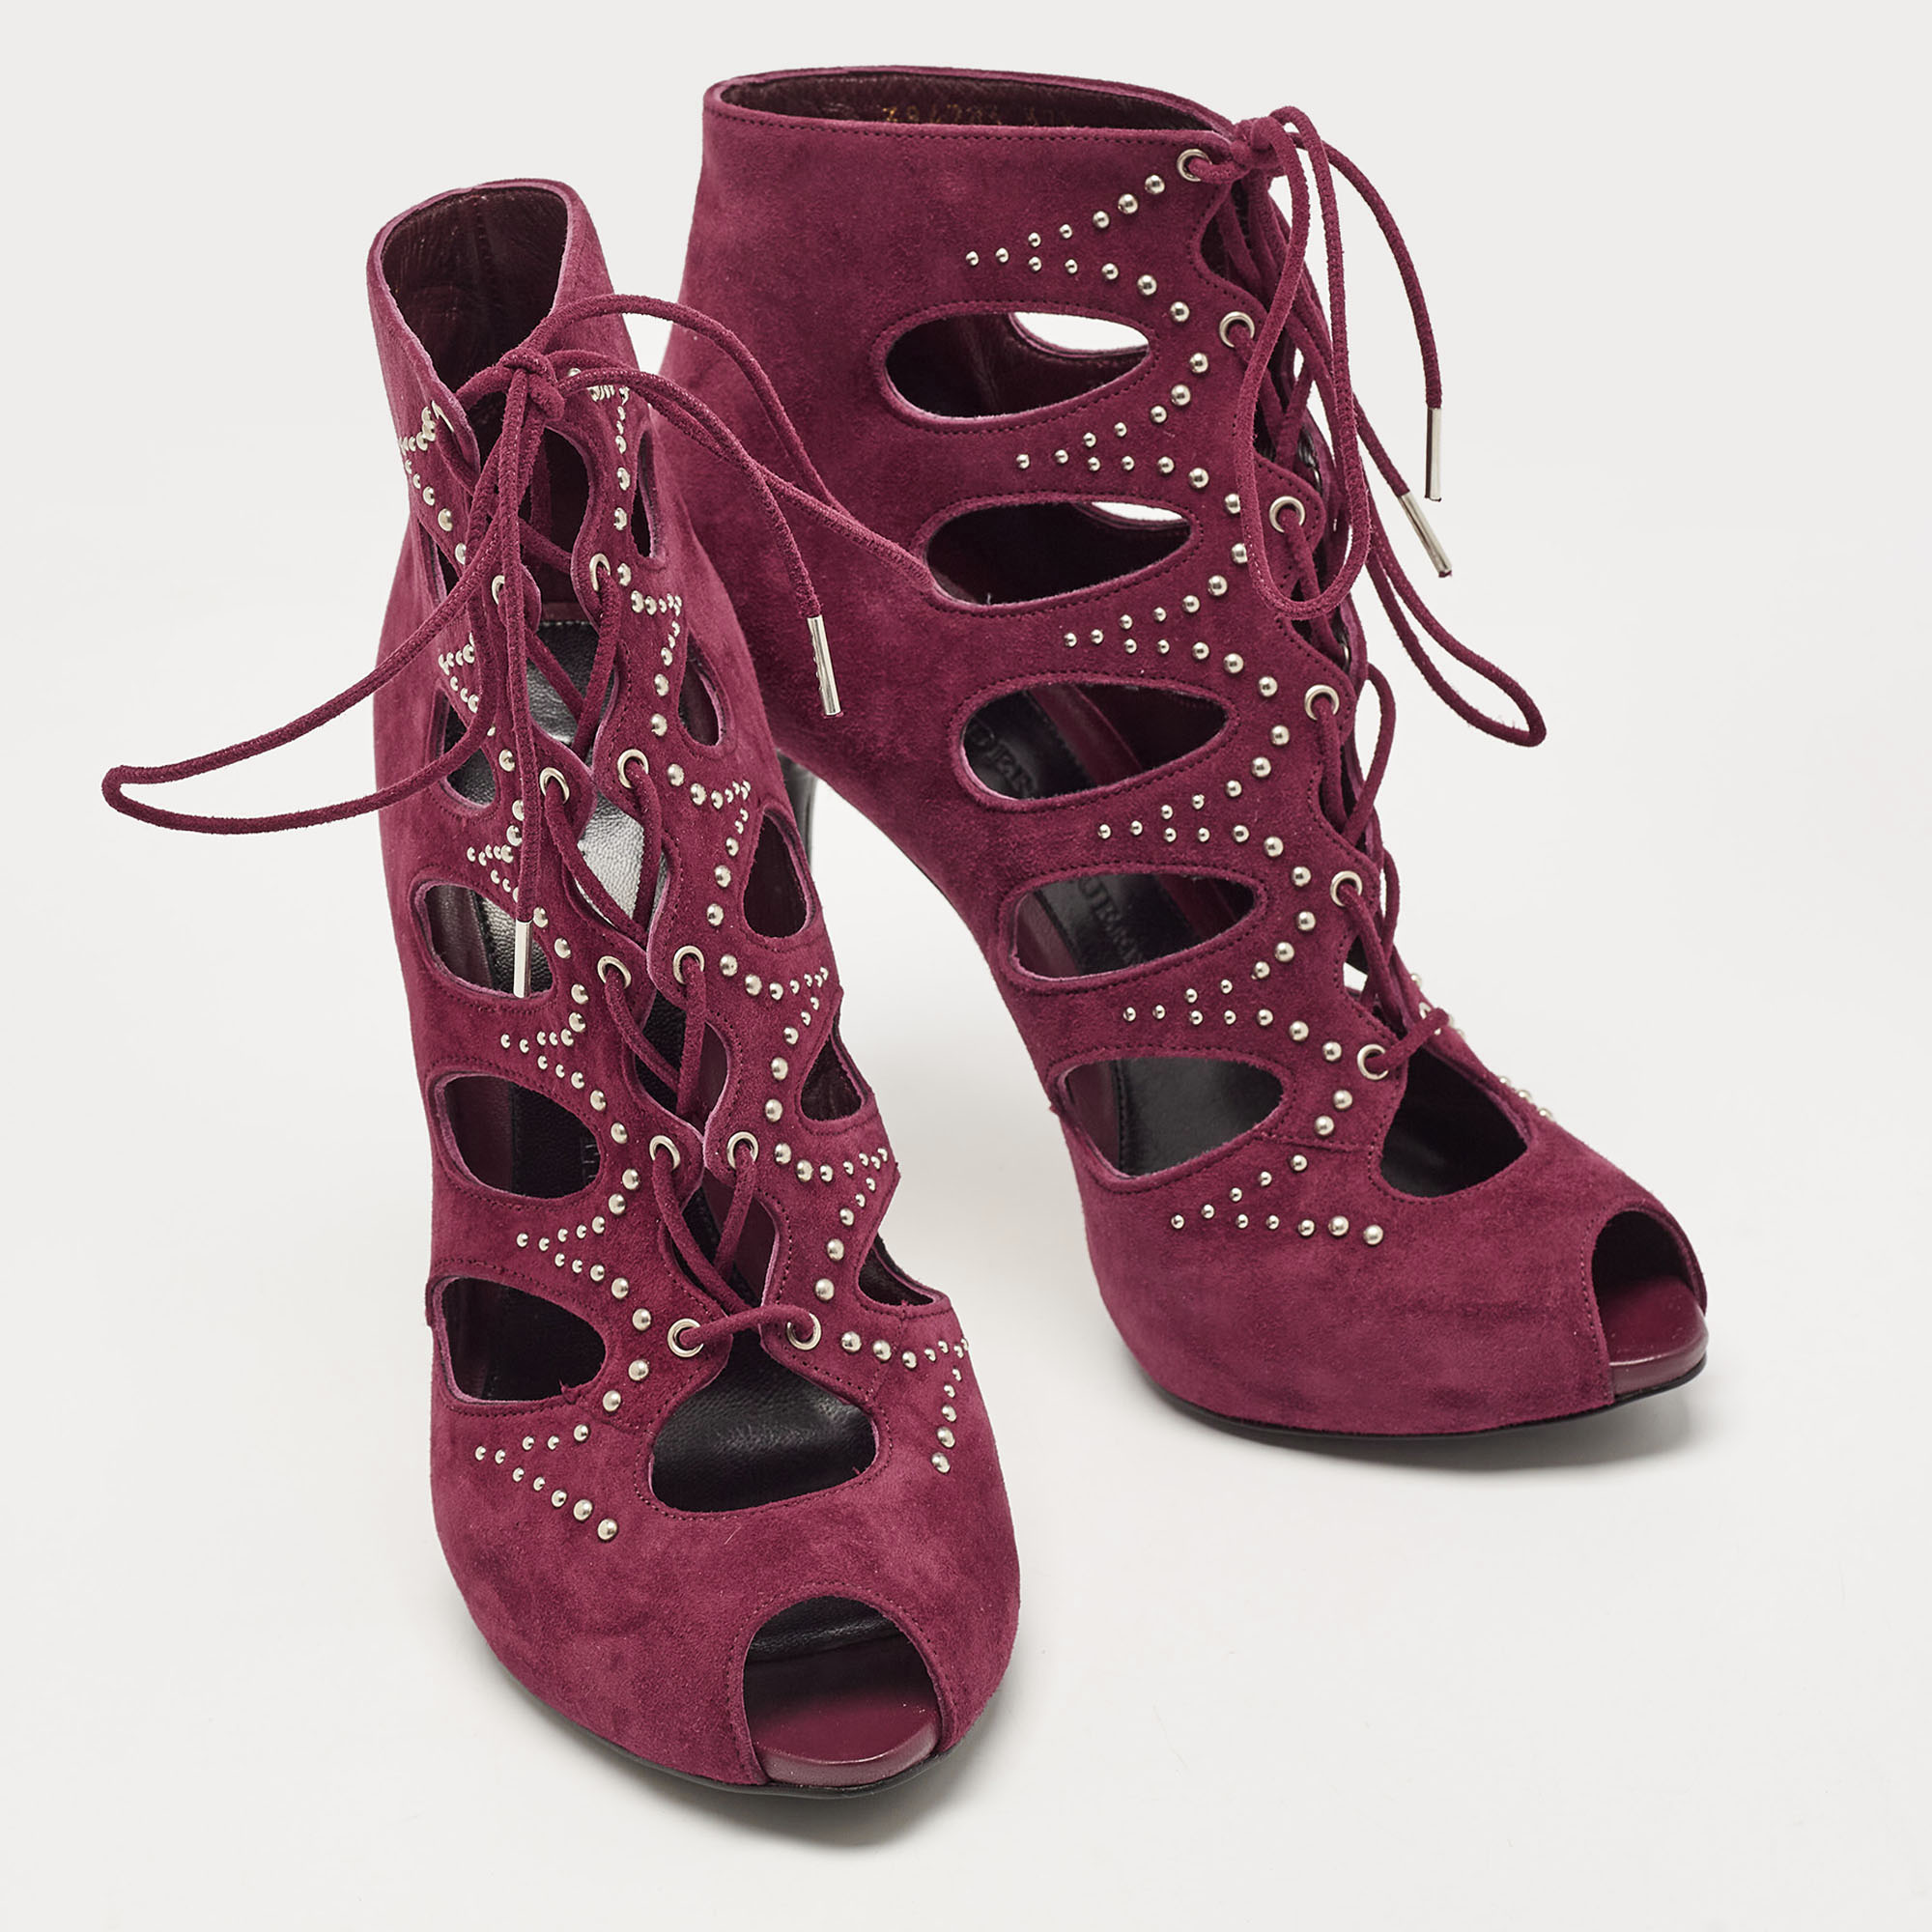 Alexander McQueen Burgundy Suede Cut Out Embellished Lace Up Sandals Size 37.5